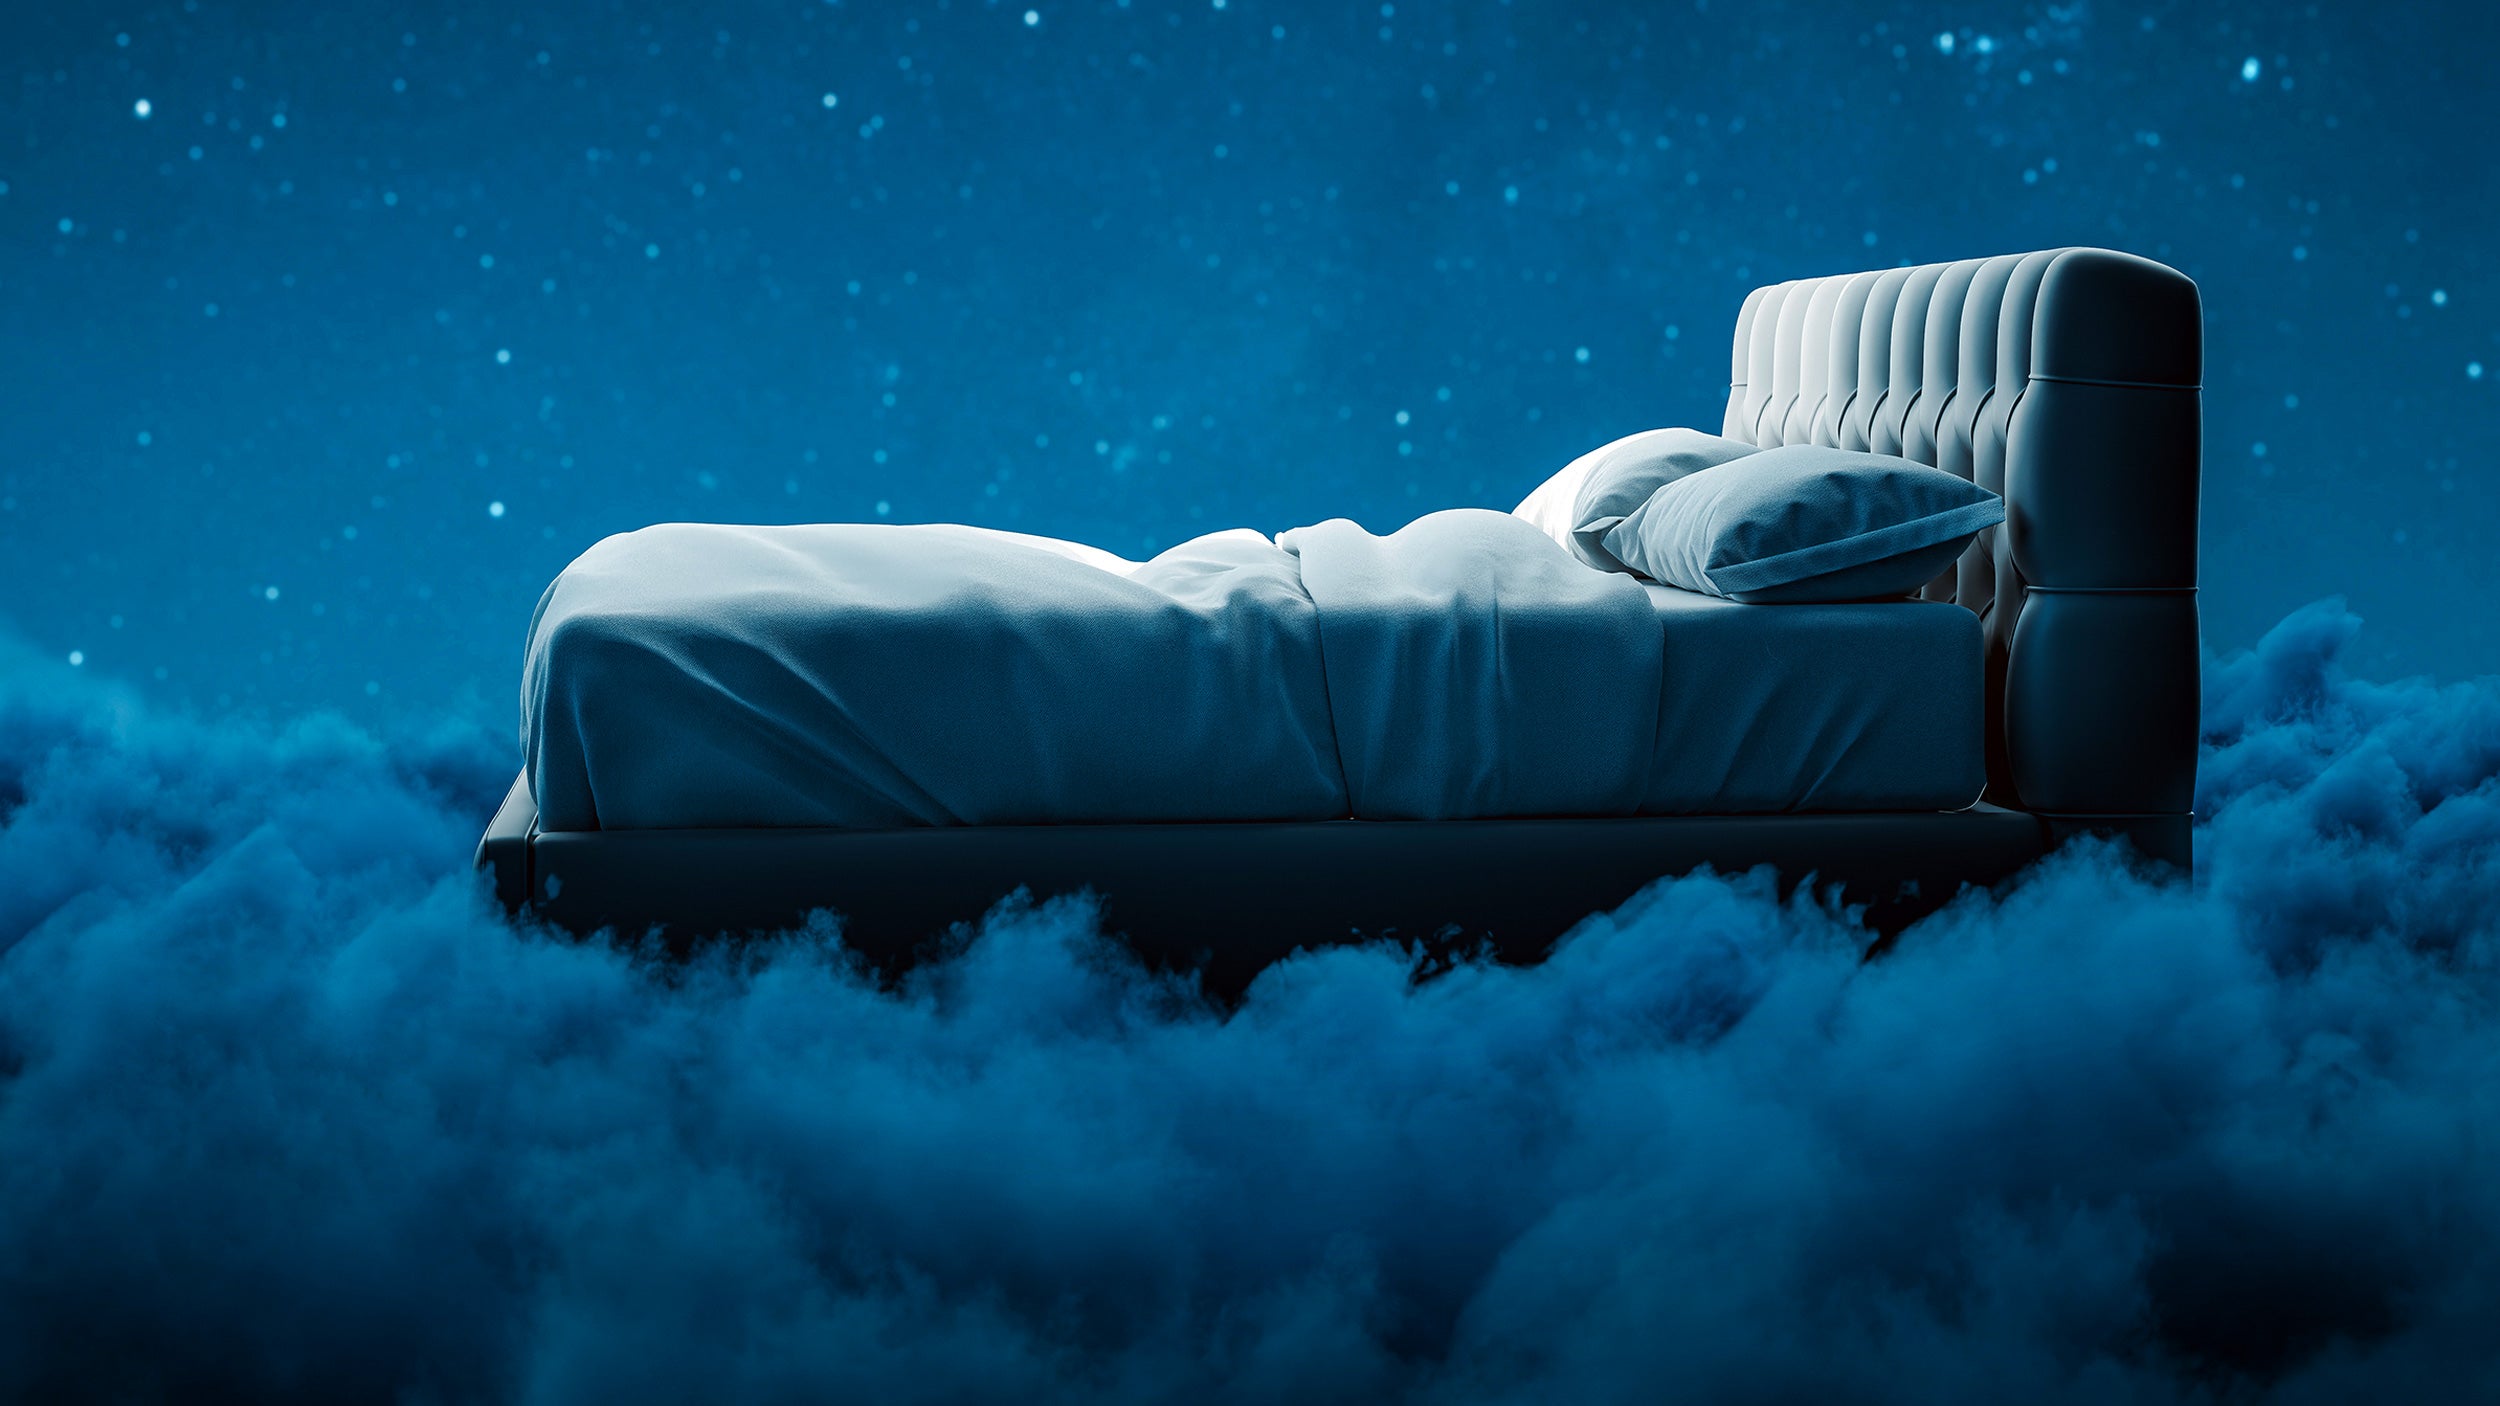 Illustration of bed in the clouds.